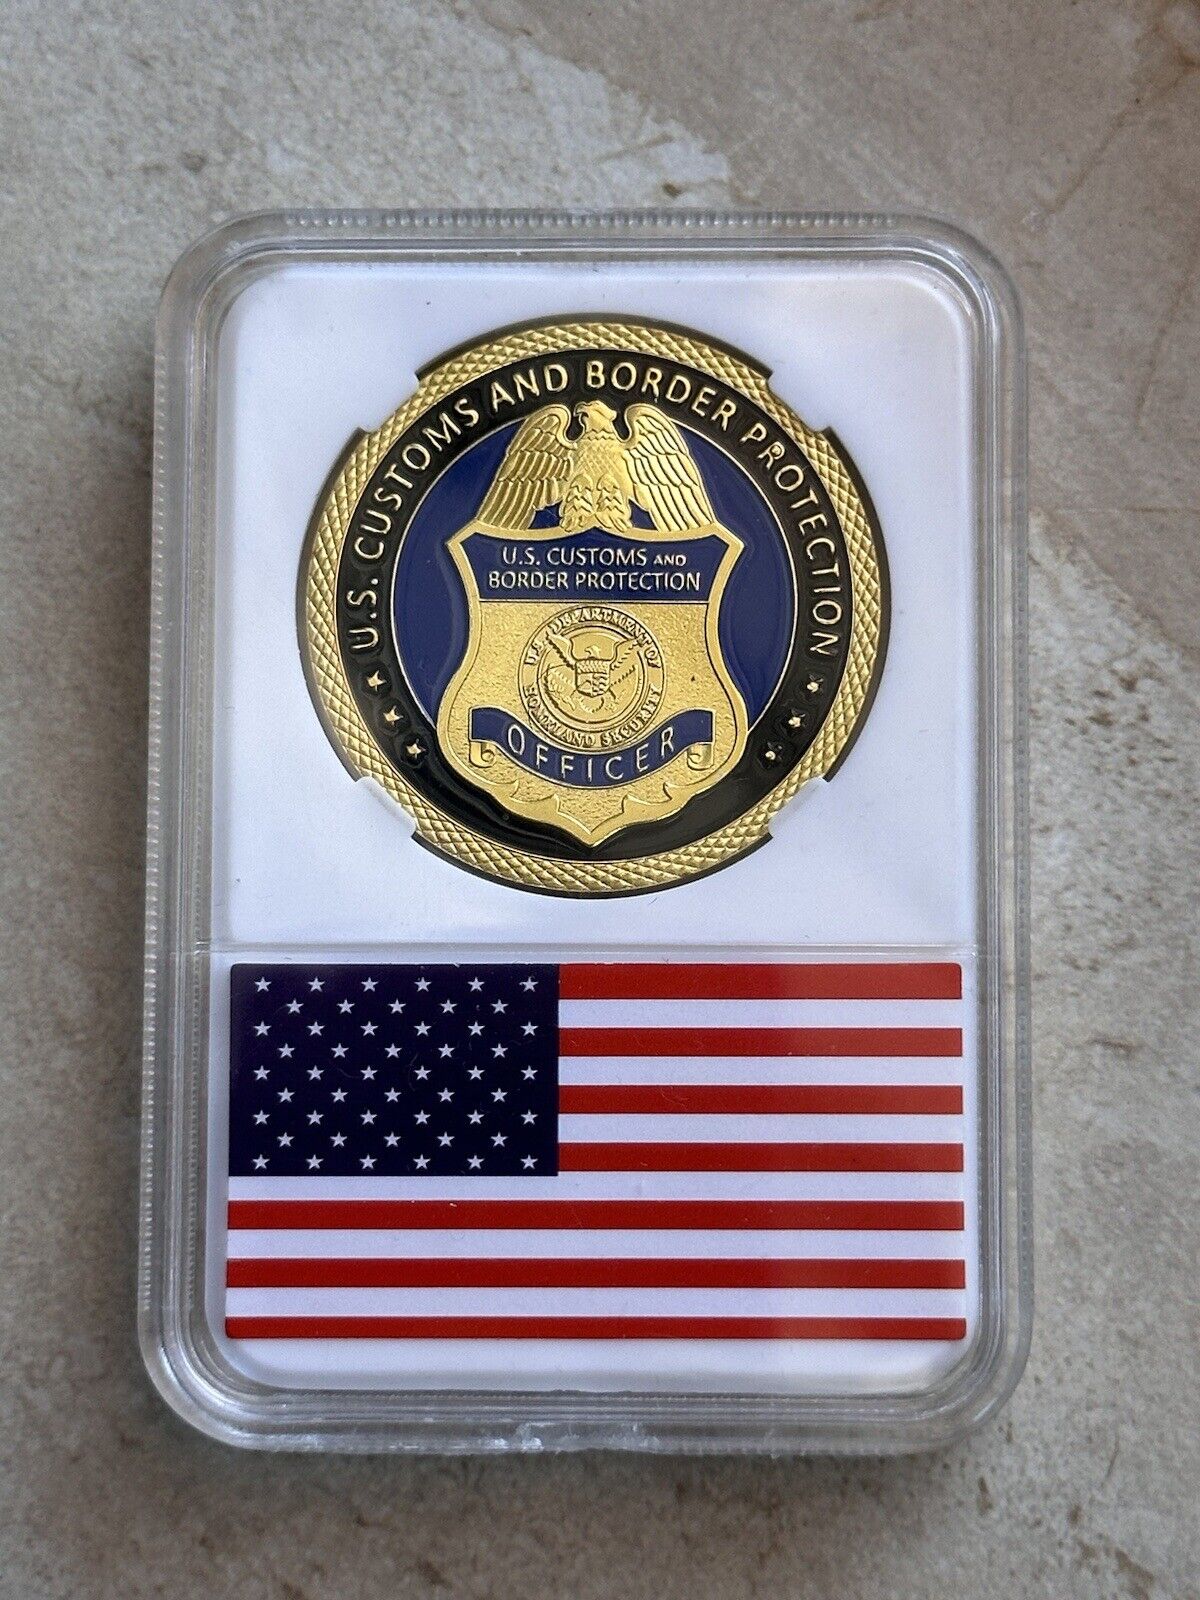 U.S CUSTOMS AND BORDER PROTECTION Challenge Coin with case.